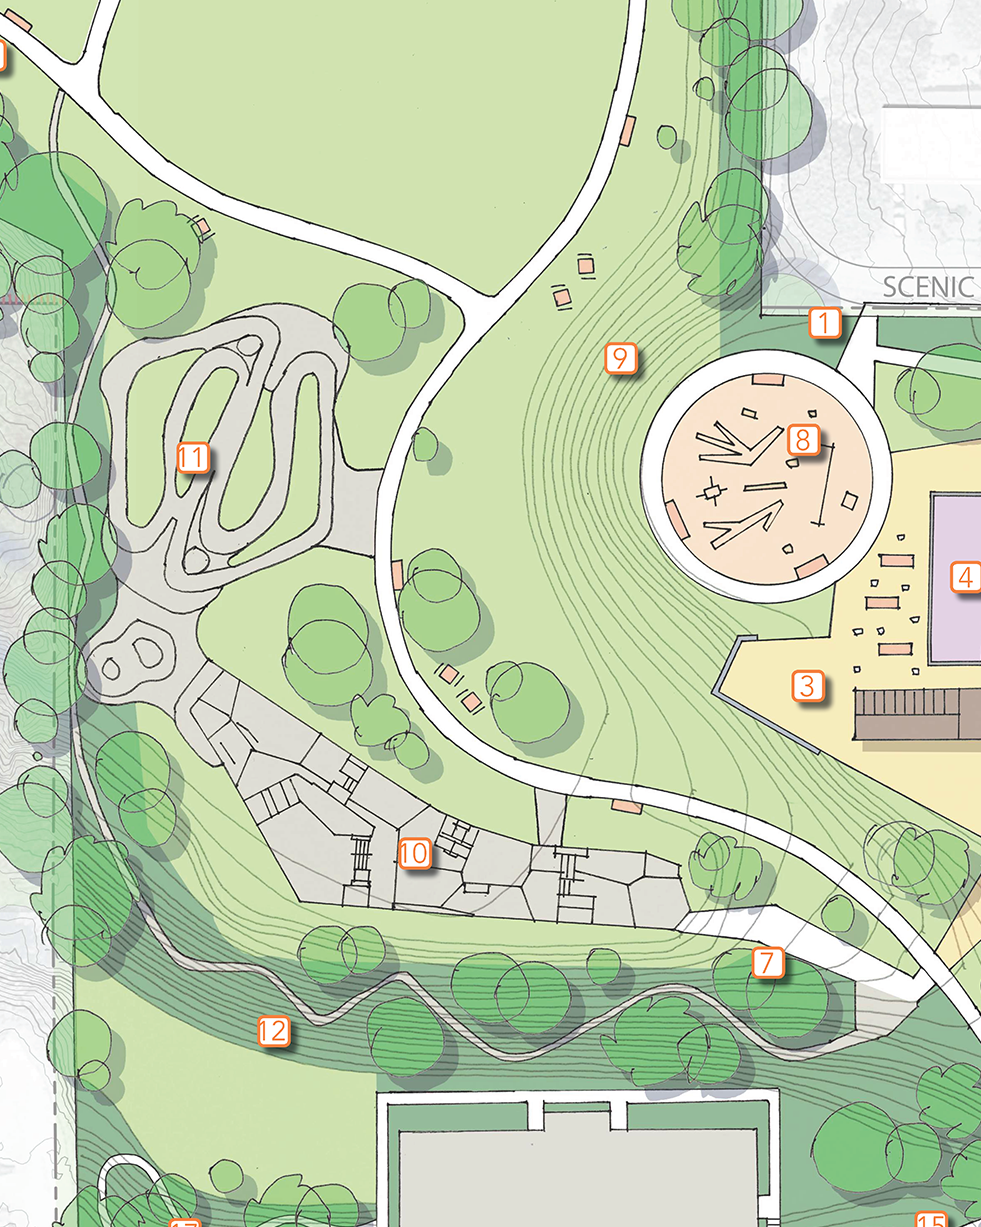 zoom in of Plateau's skate and pump track design